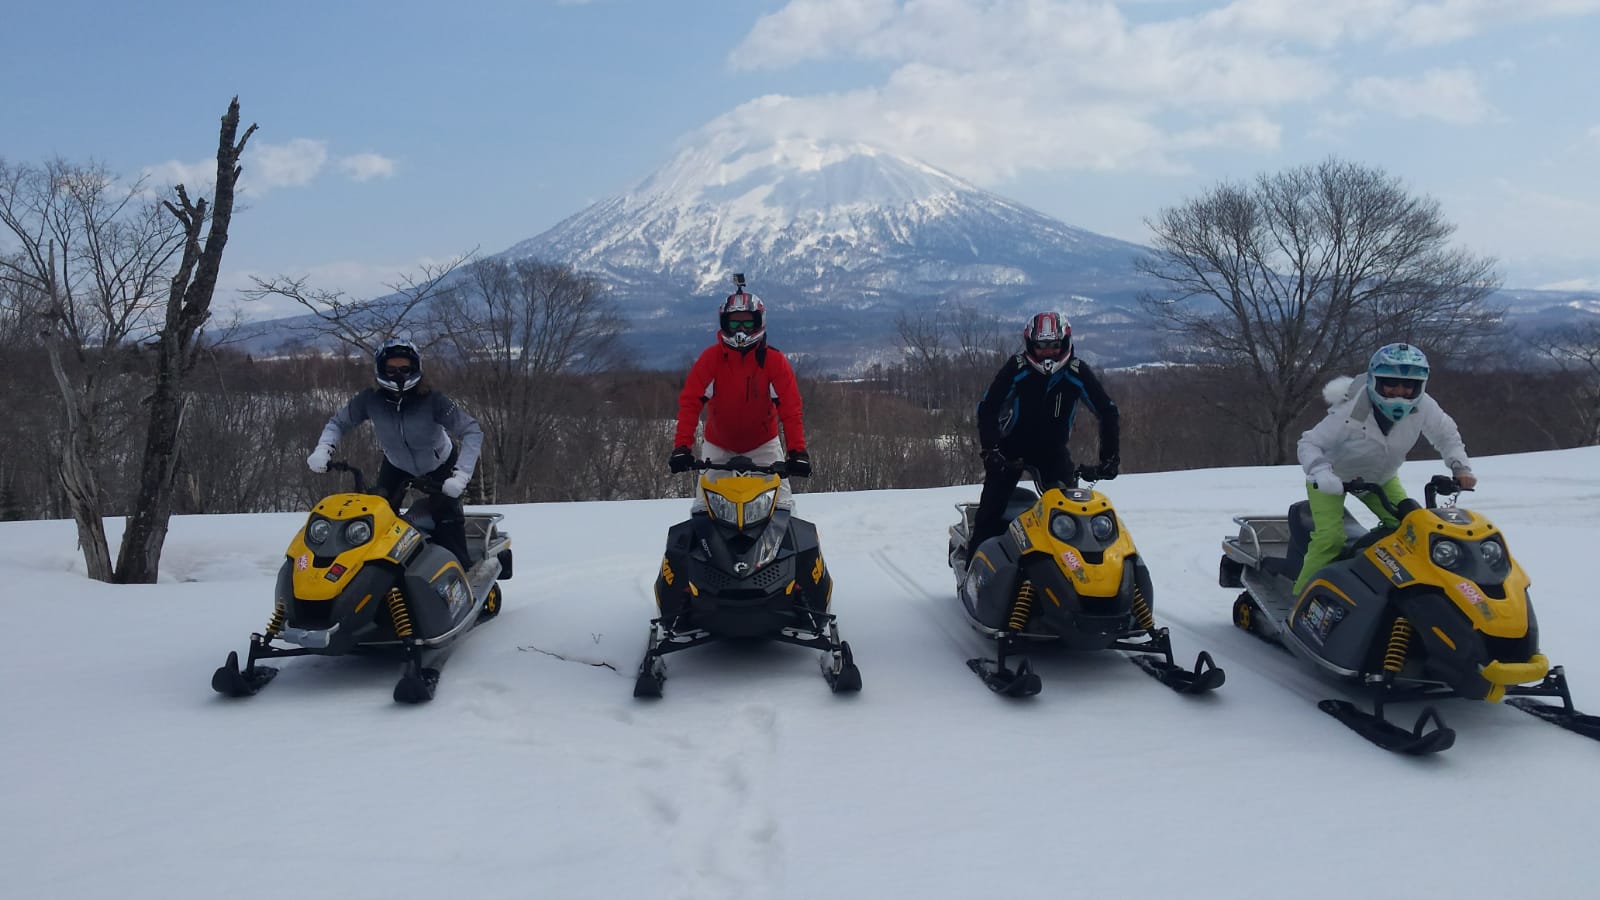 Riding snowmobile with the family with Mount Yotei backdrop in Niseko, Japan. Skiing & Snowmobiles in Niseko, Japan